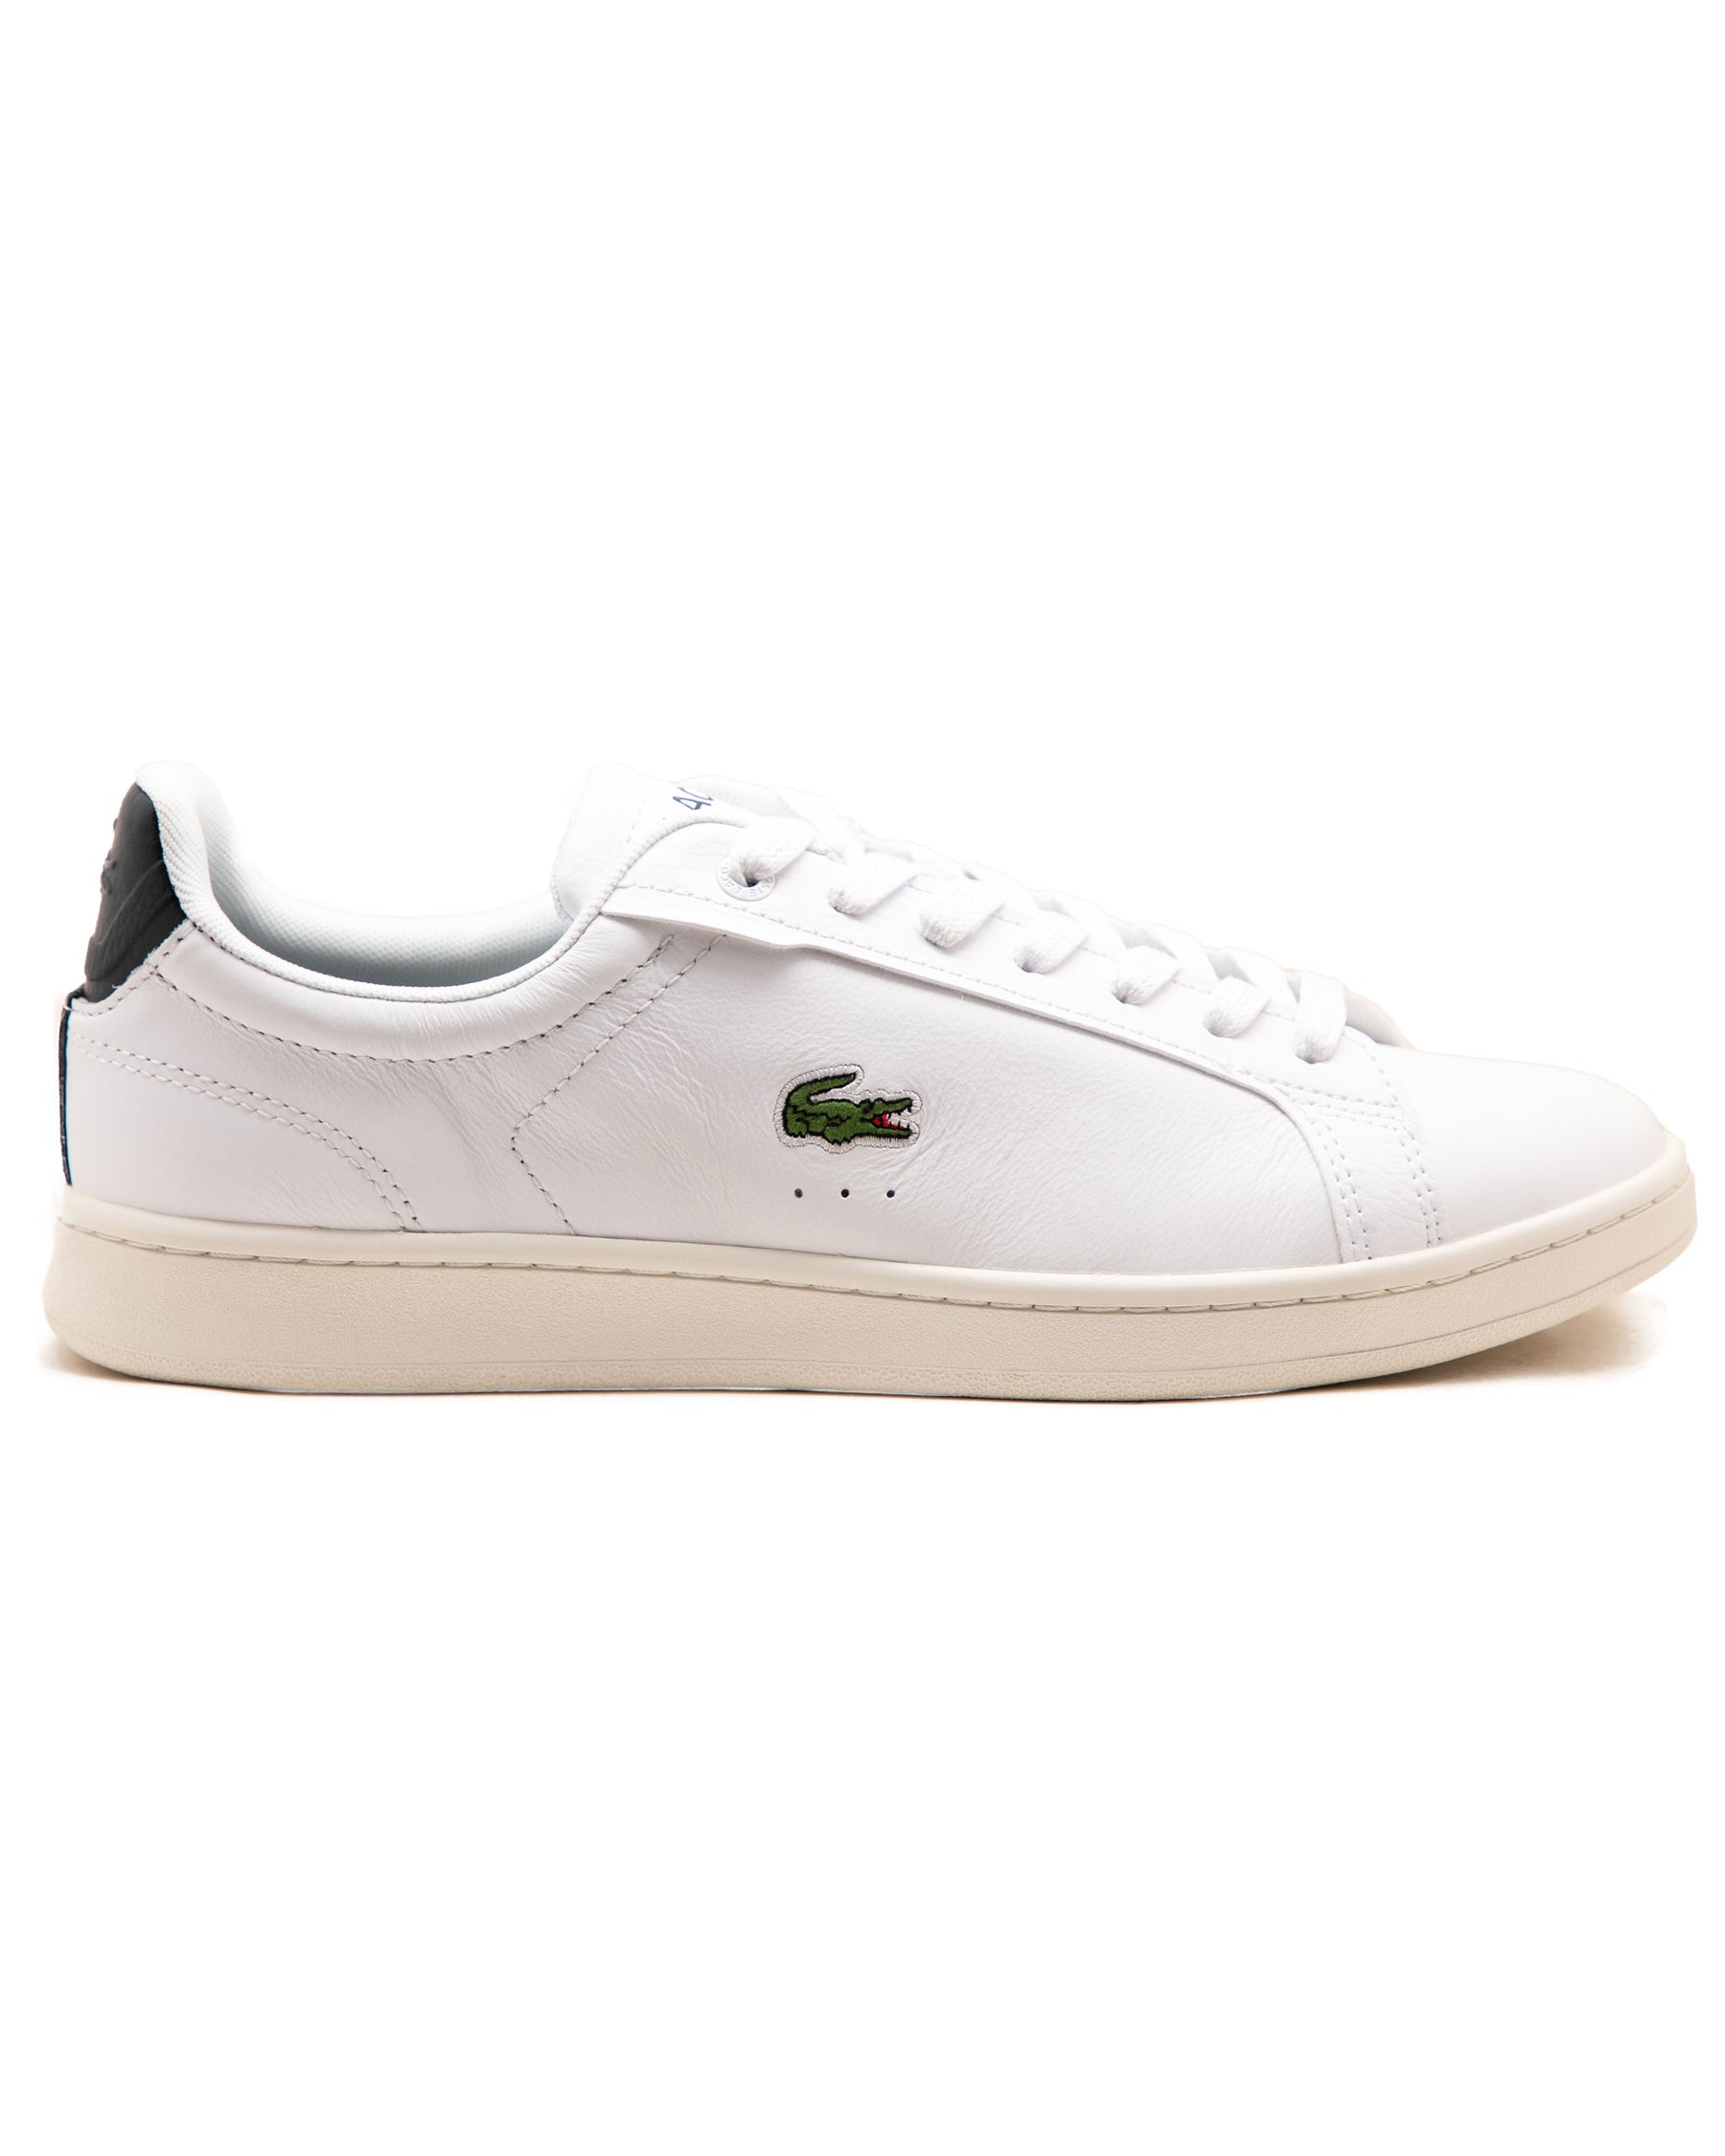 Lacoste Carnaby Pro 123 9 Bianco Verde